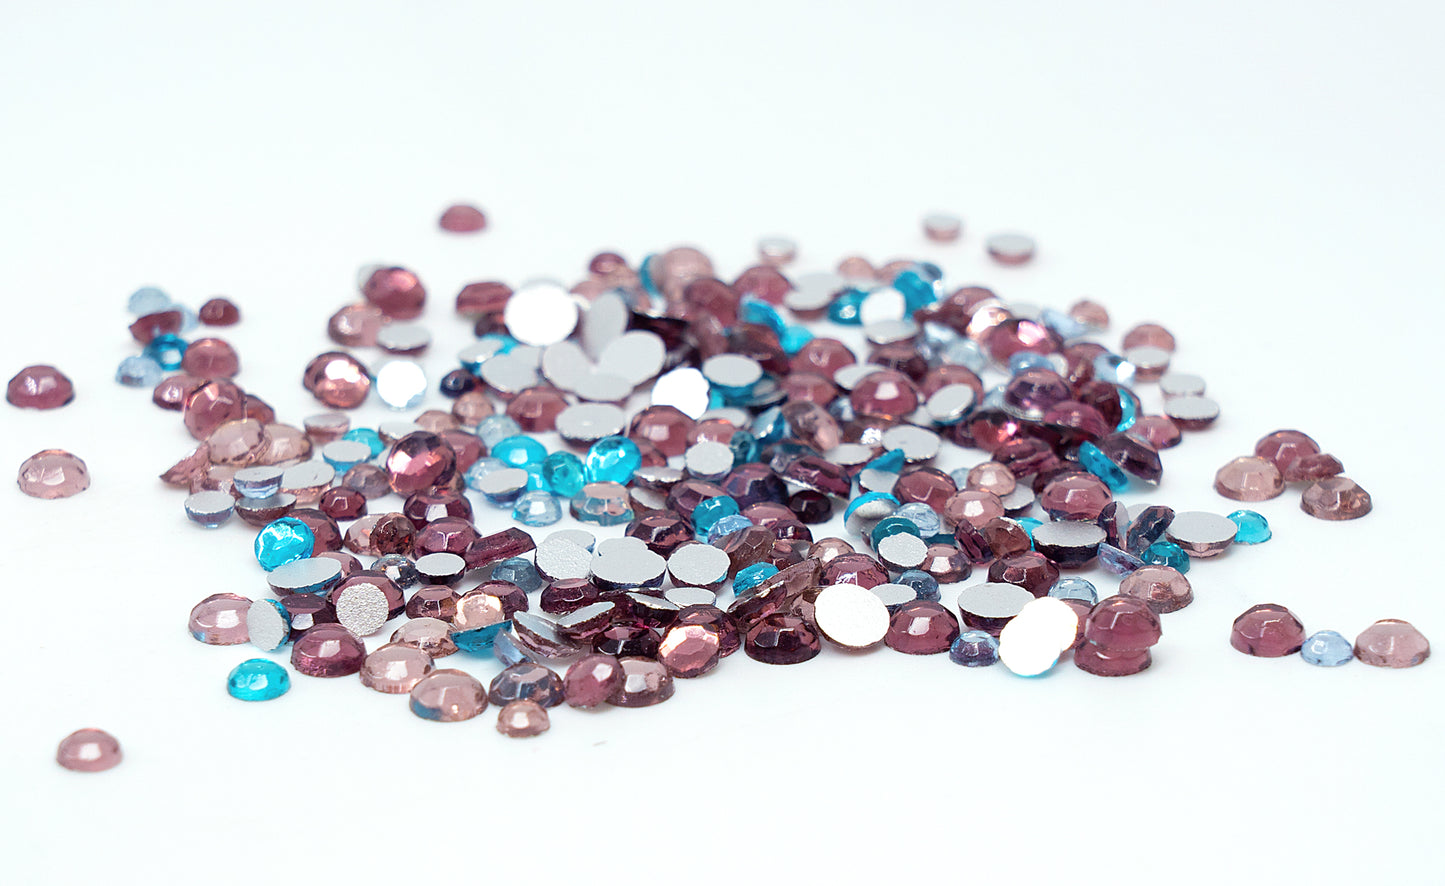 Surprise Mix of Small Flat Back Glass Rhinestone Crystals approx. 3-6mm (SS12-SS28) for jewelry and nail design